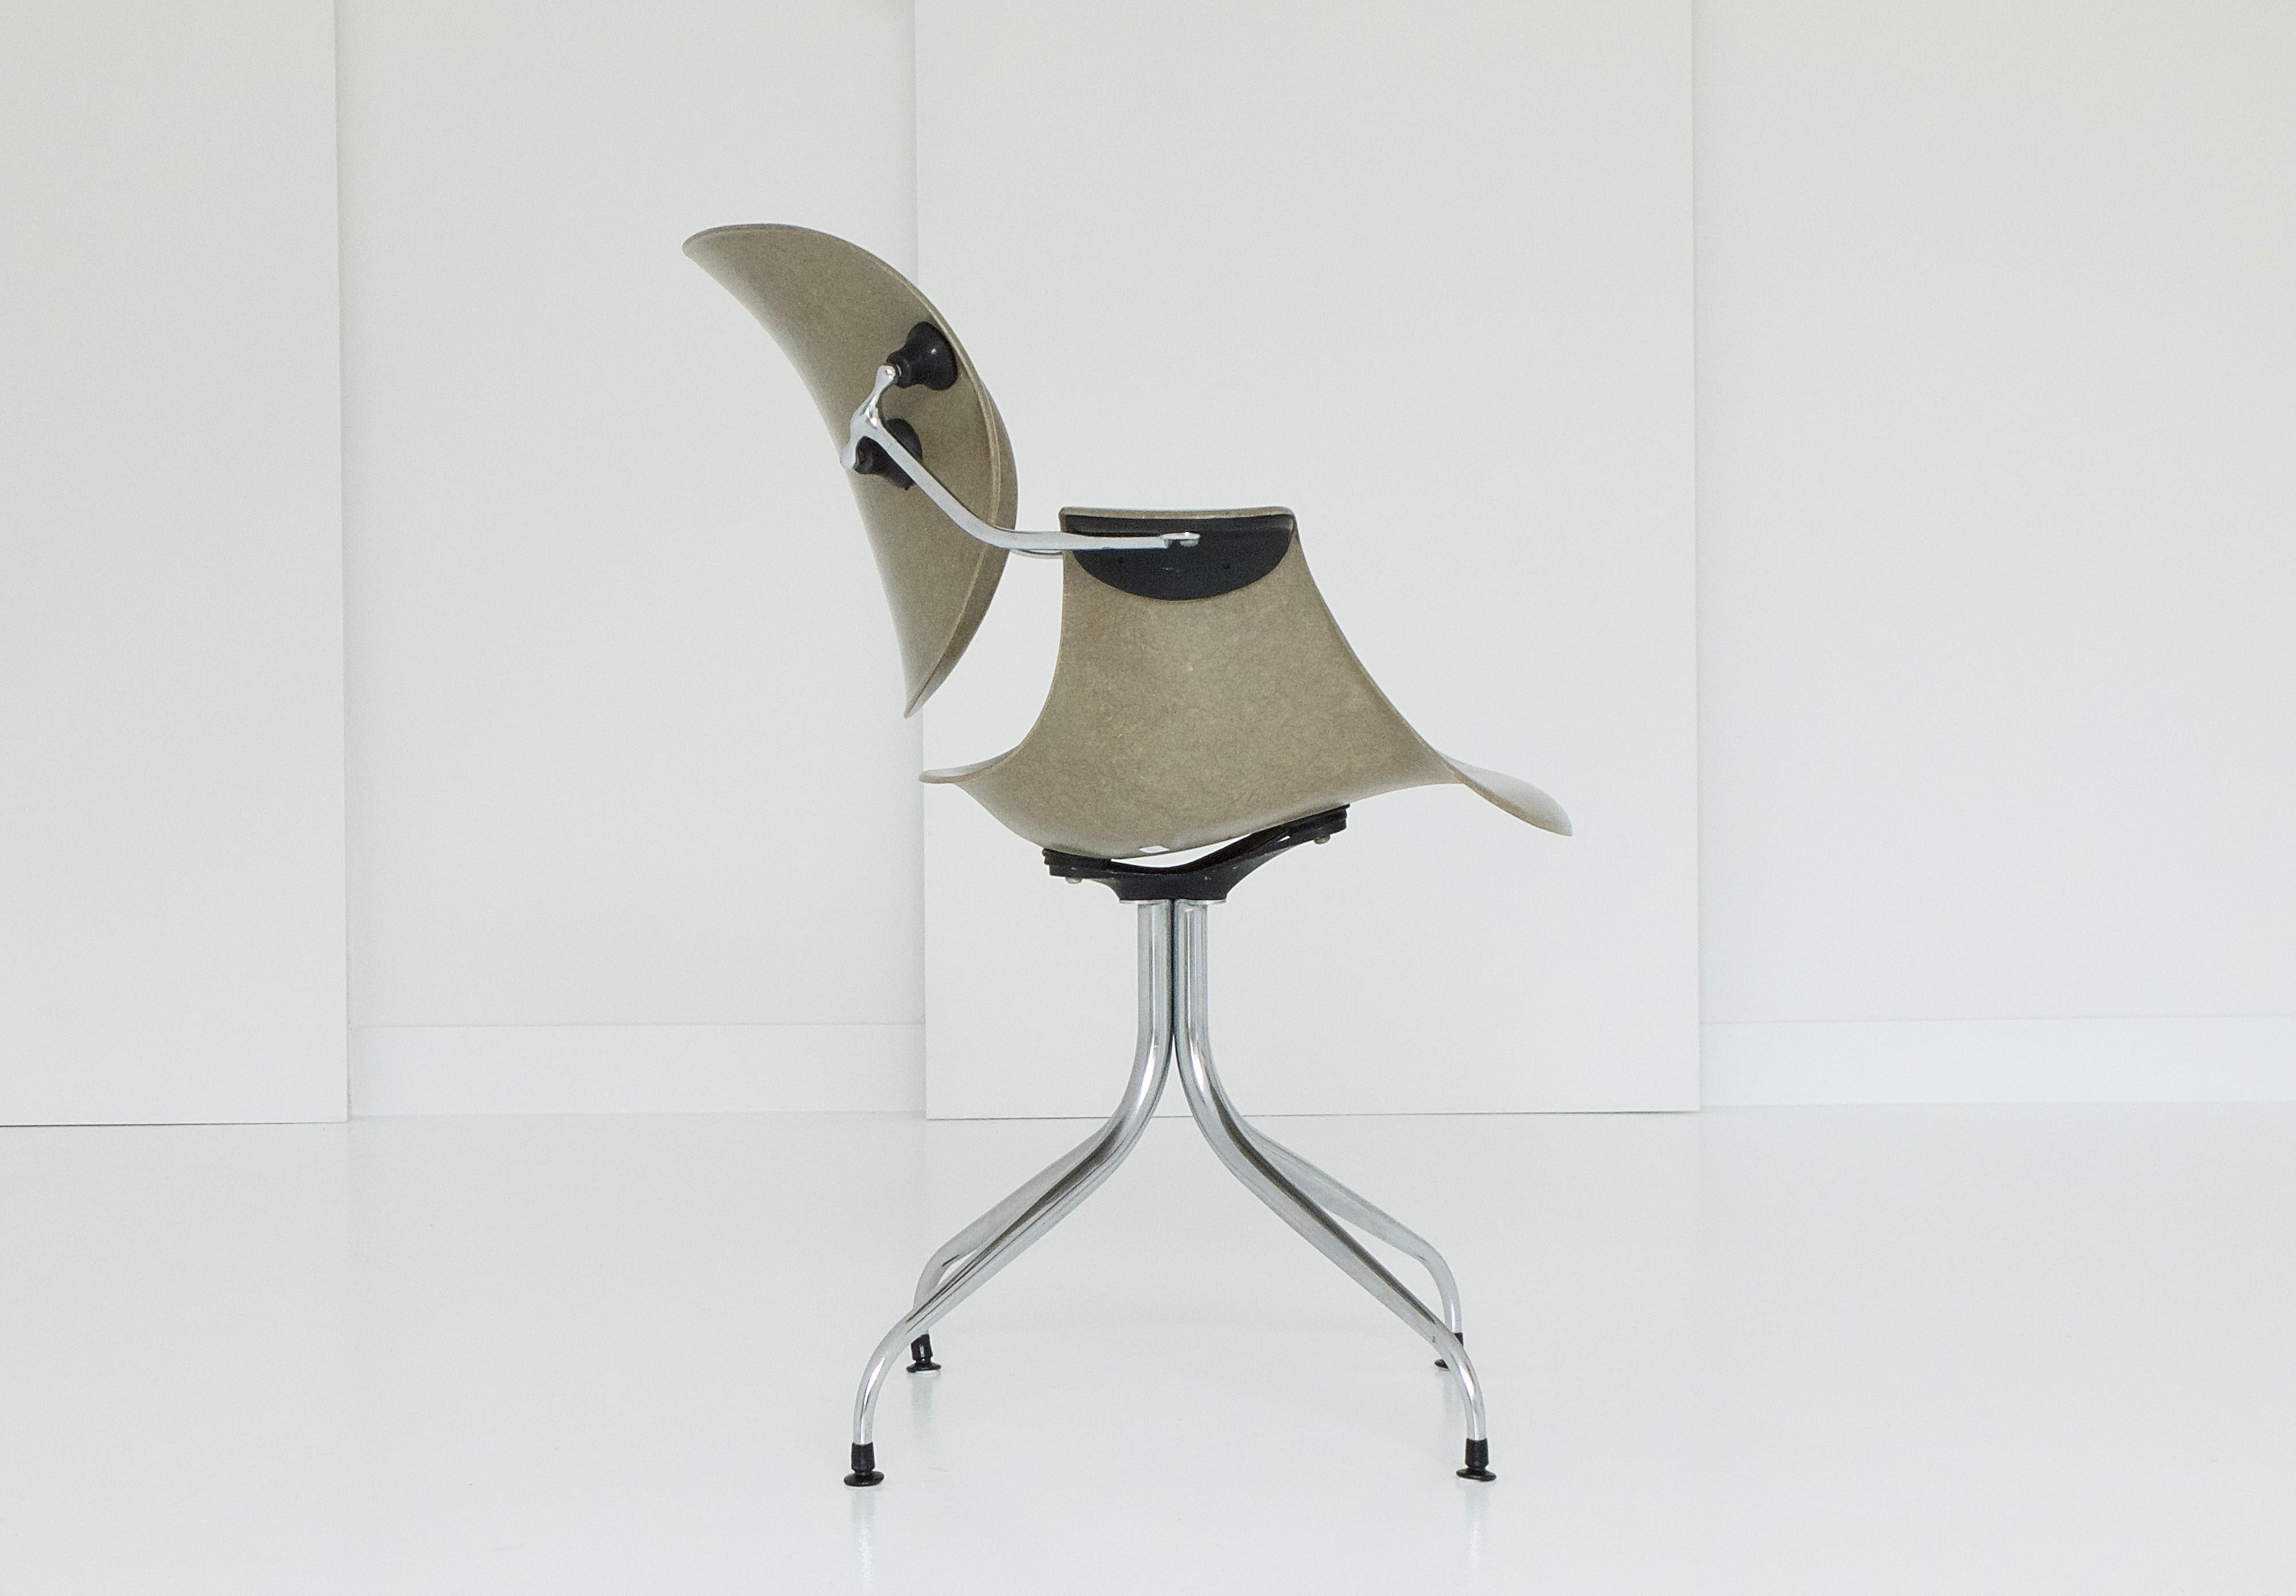 The „swag leg chair“ by George Nelson dates back to 1958 – but would still be a perfect fit in any science fiction movie today. The innovative design resulted from nelson’s demands for the development of his swag leg group, which includes chairs, a